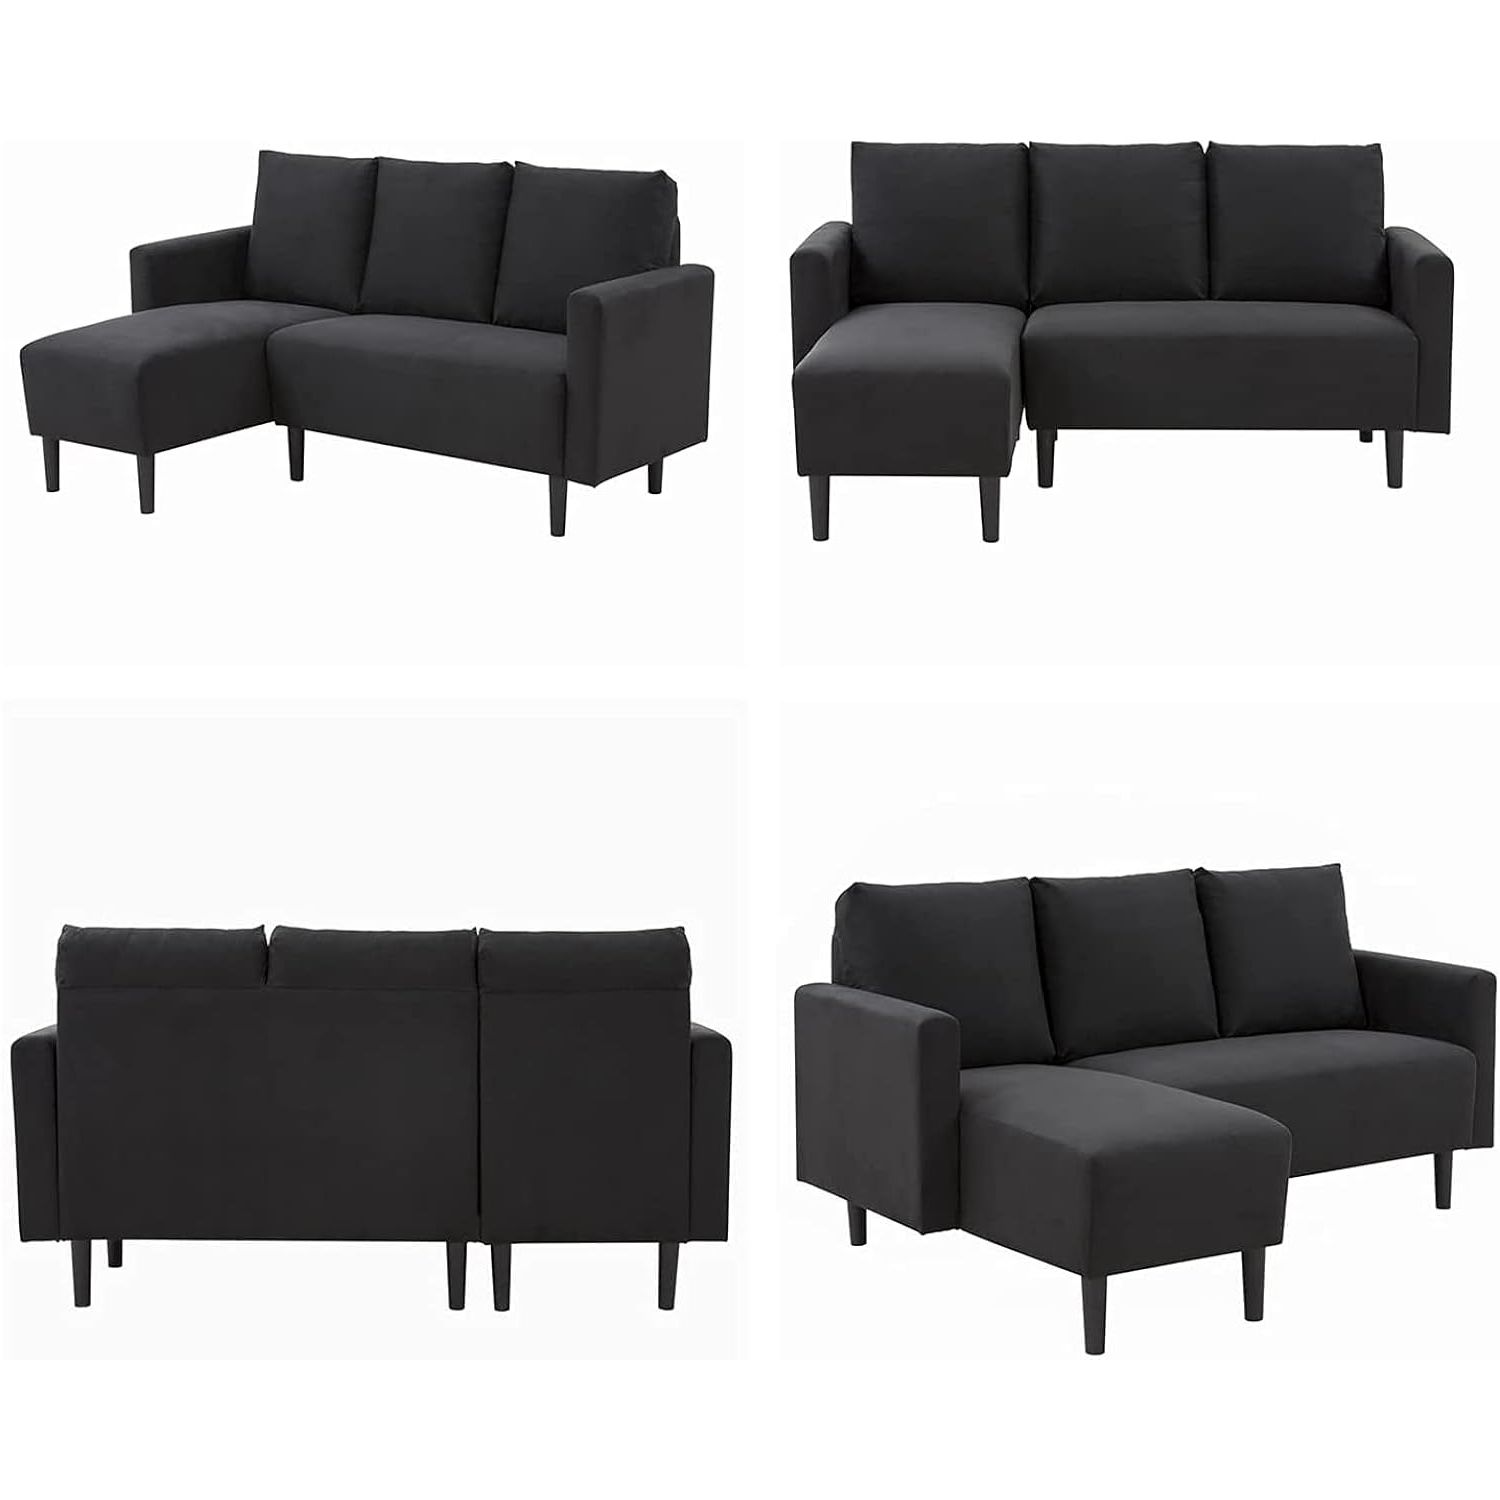 Fashionable Amazon: Convertible Sectional Sofa Couch, Modern Fabric Sofa Bed 3 Inside 3 Seat Convertible Sectional Sofas (View 14 of 15)